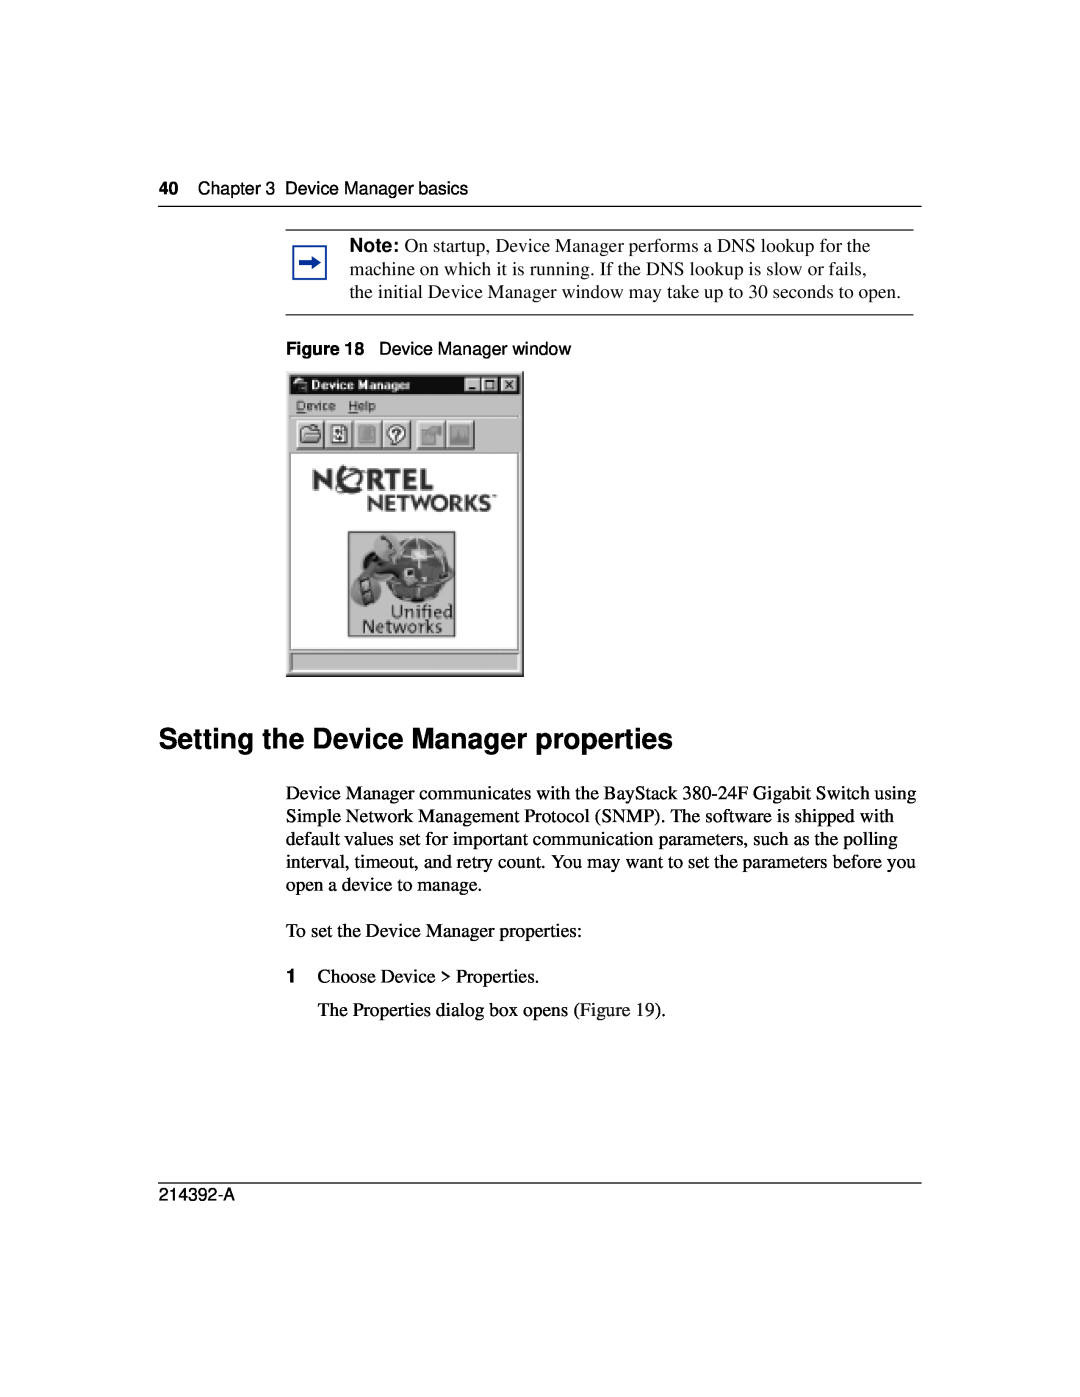 Nortel Networks 380-24F manual Setting the Device Manager properties 